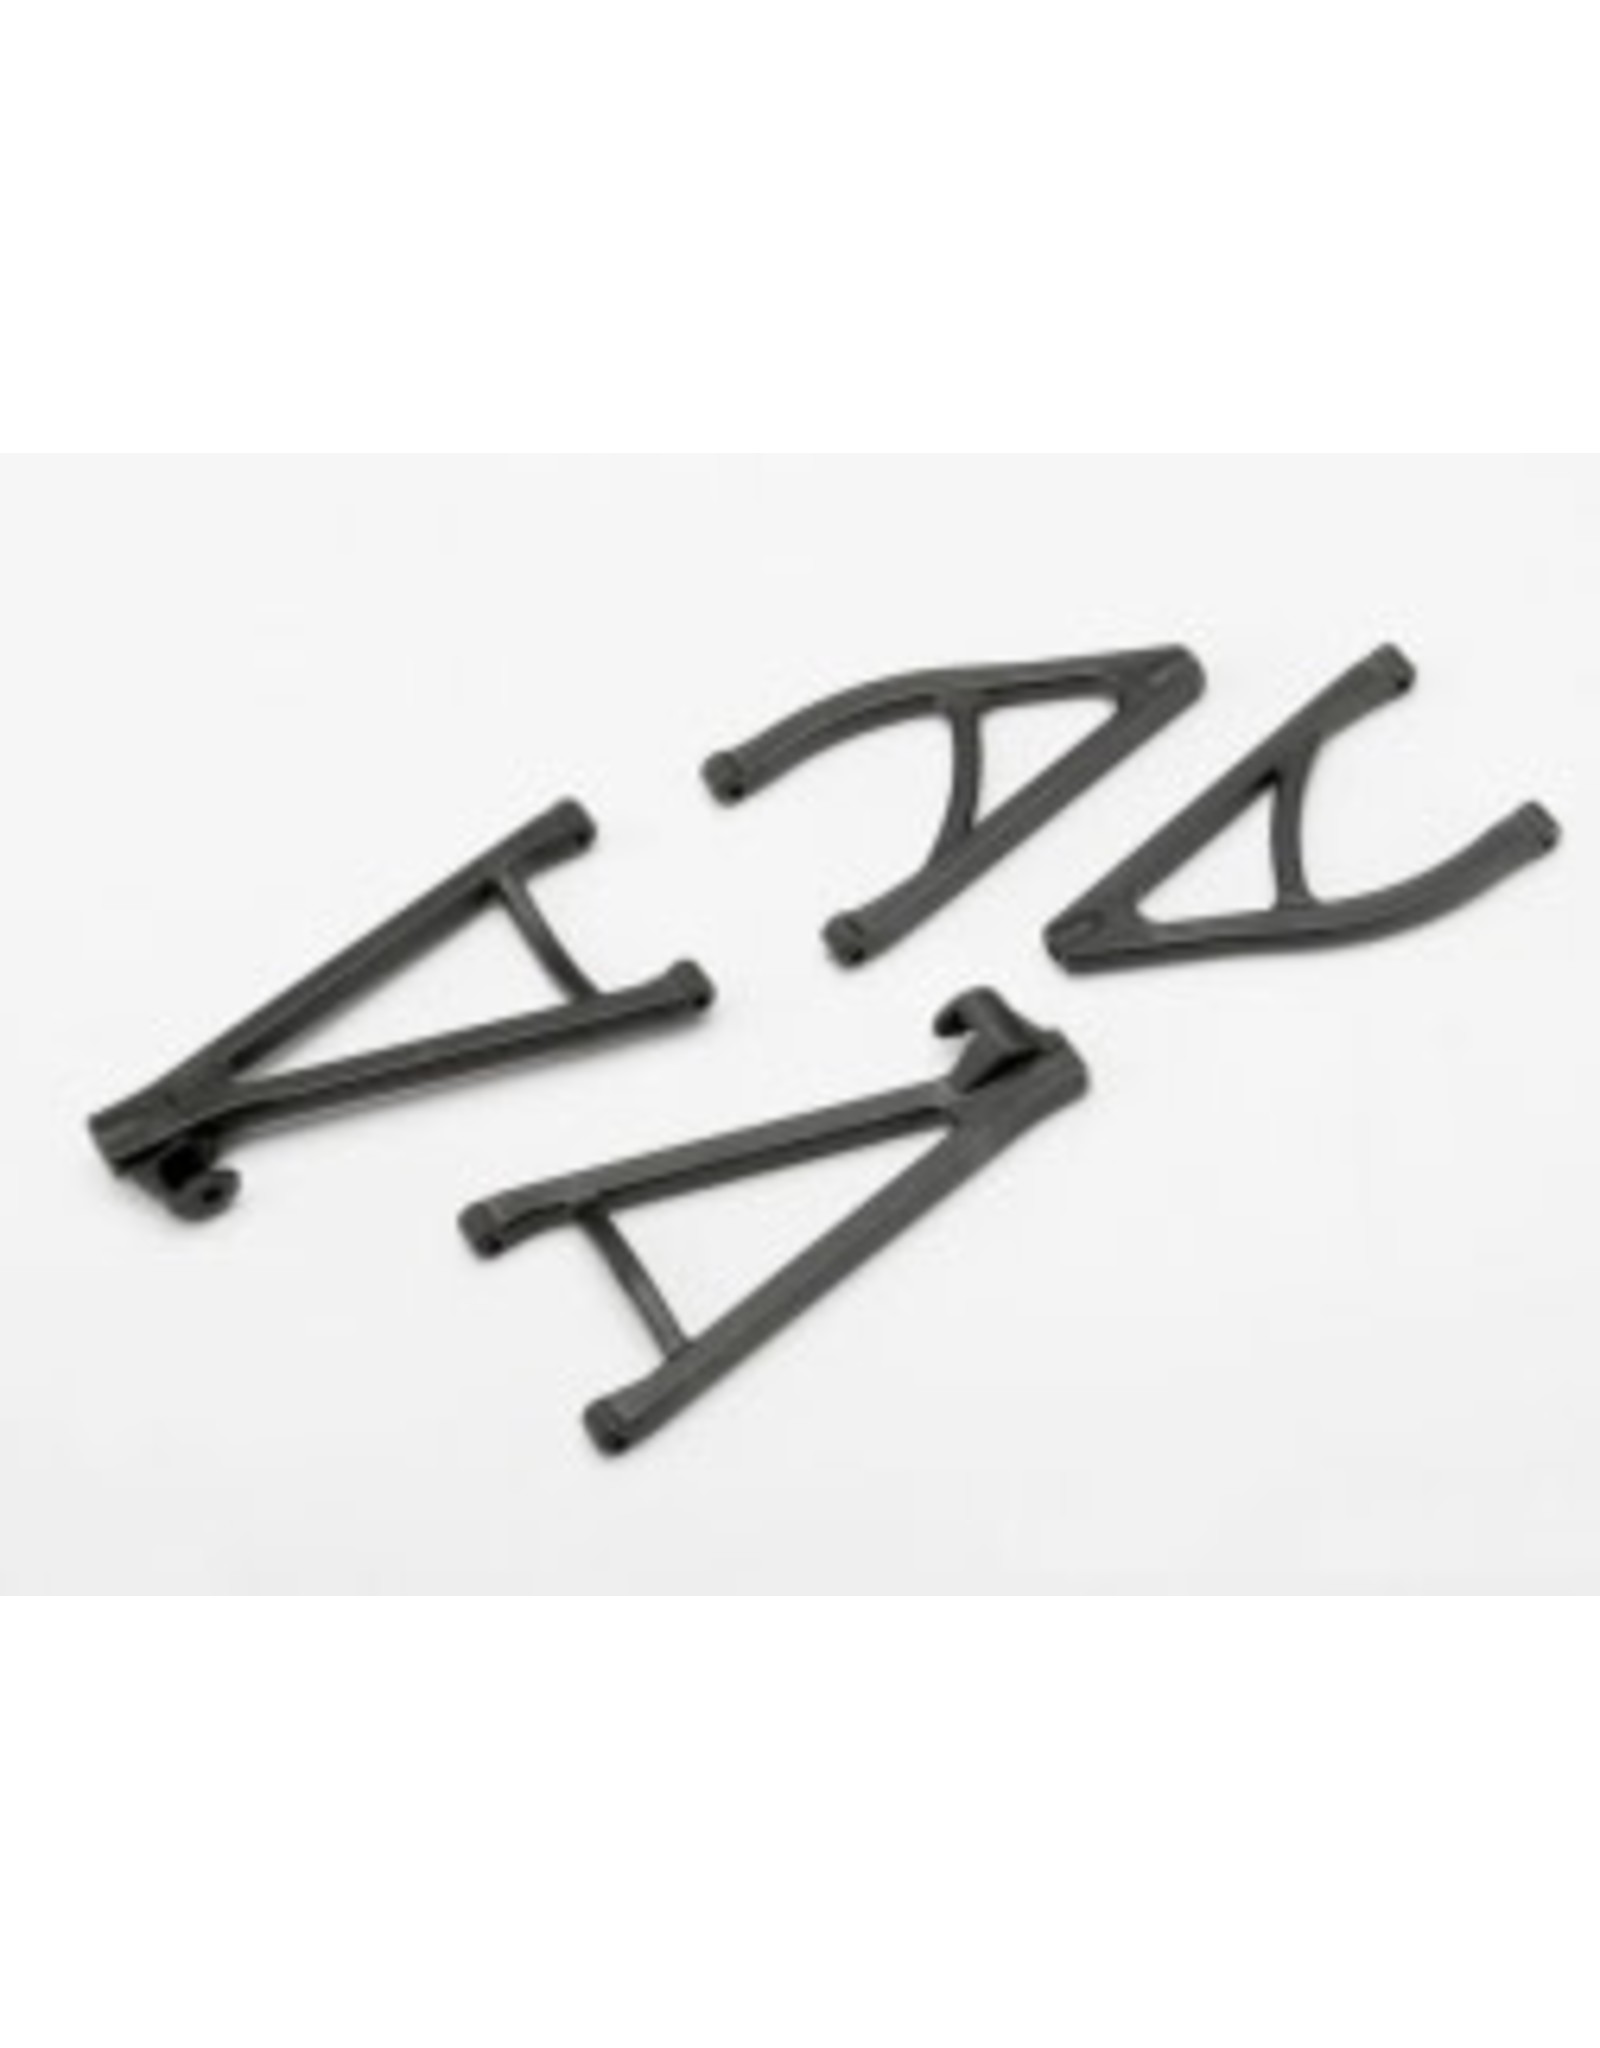 Traxxas [Suspension arm set, rear (includes upper right & left and lower right & left arms)] Suspension arm set, rear (includes upper right & left and lower right & left arms)